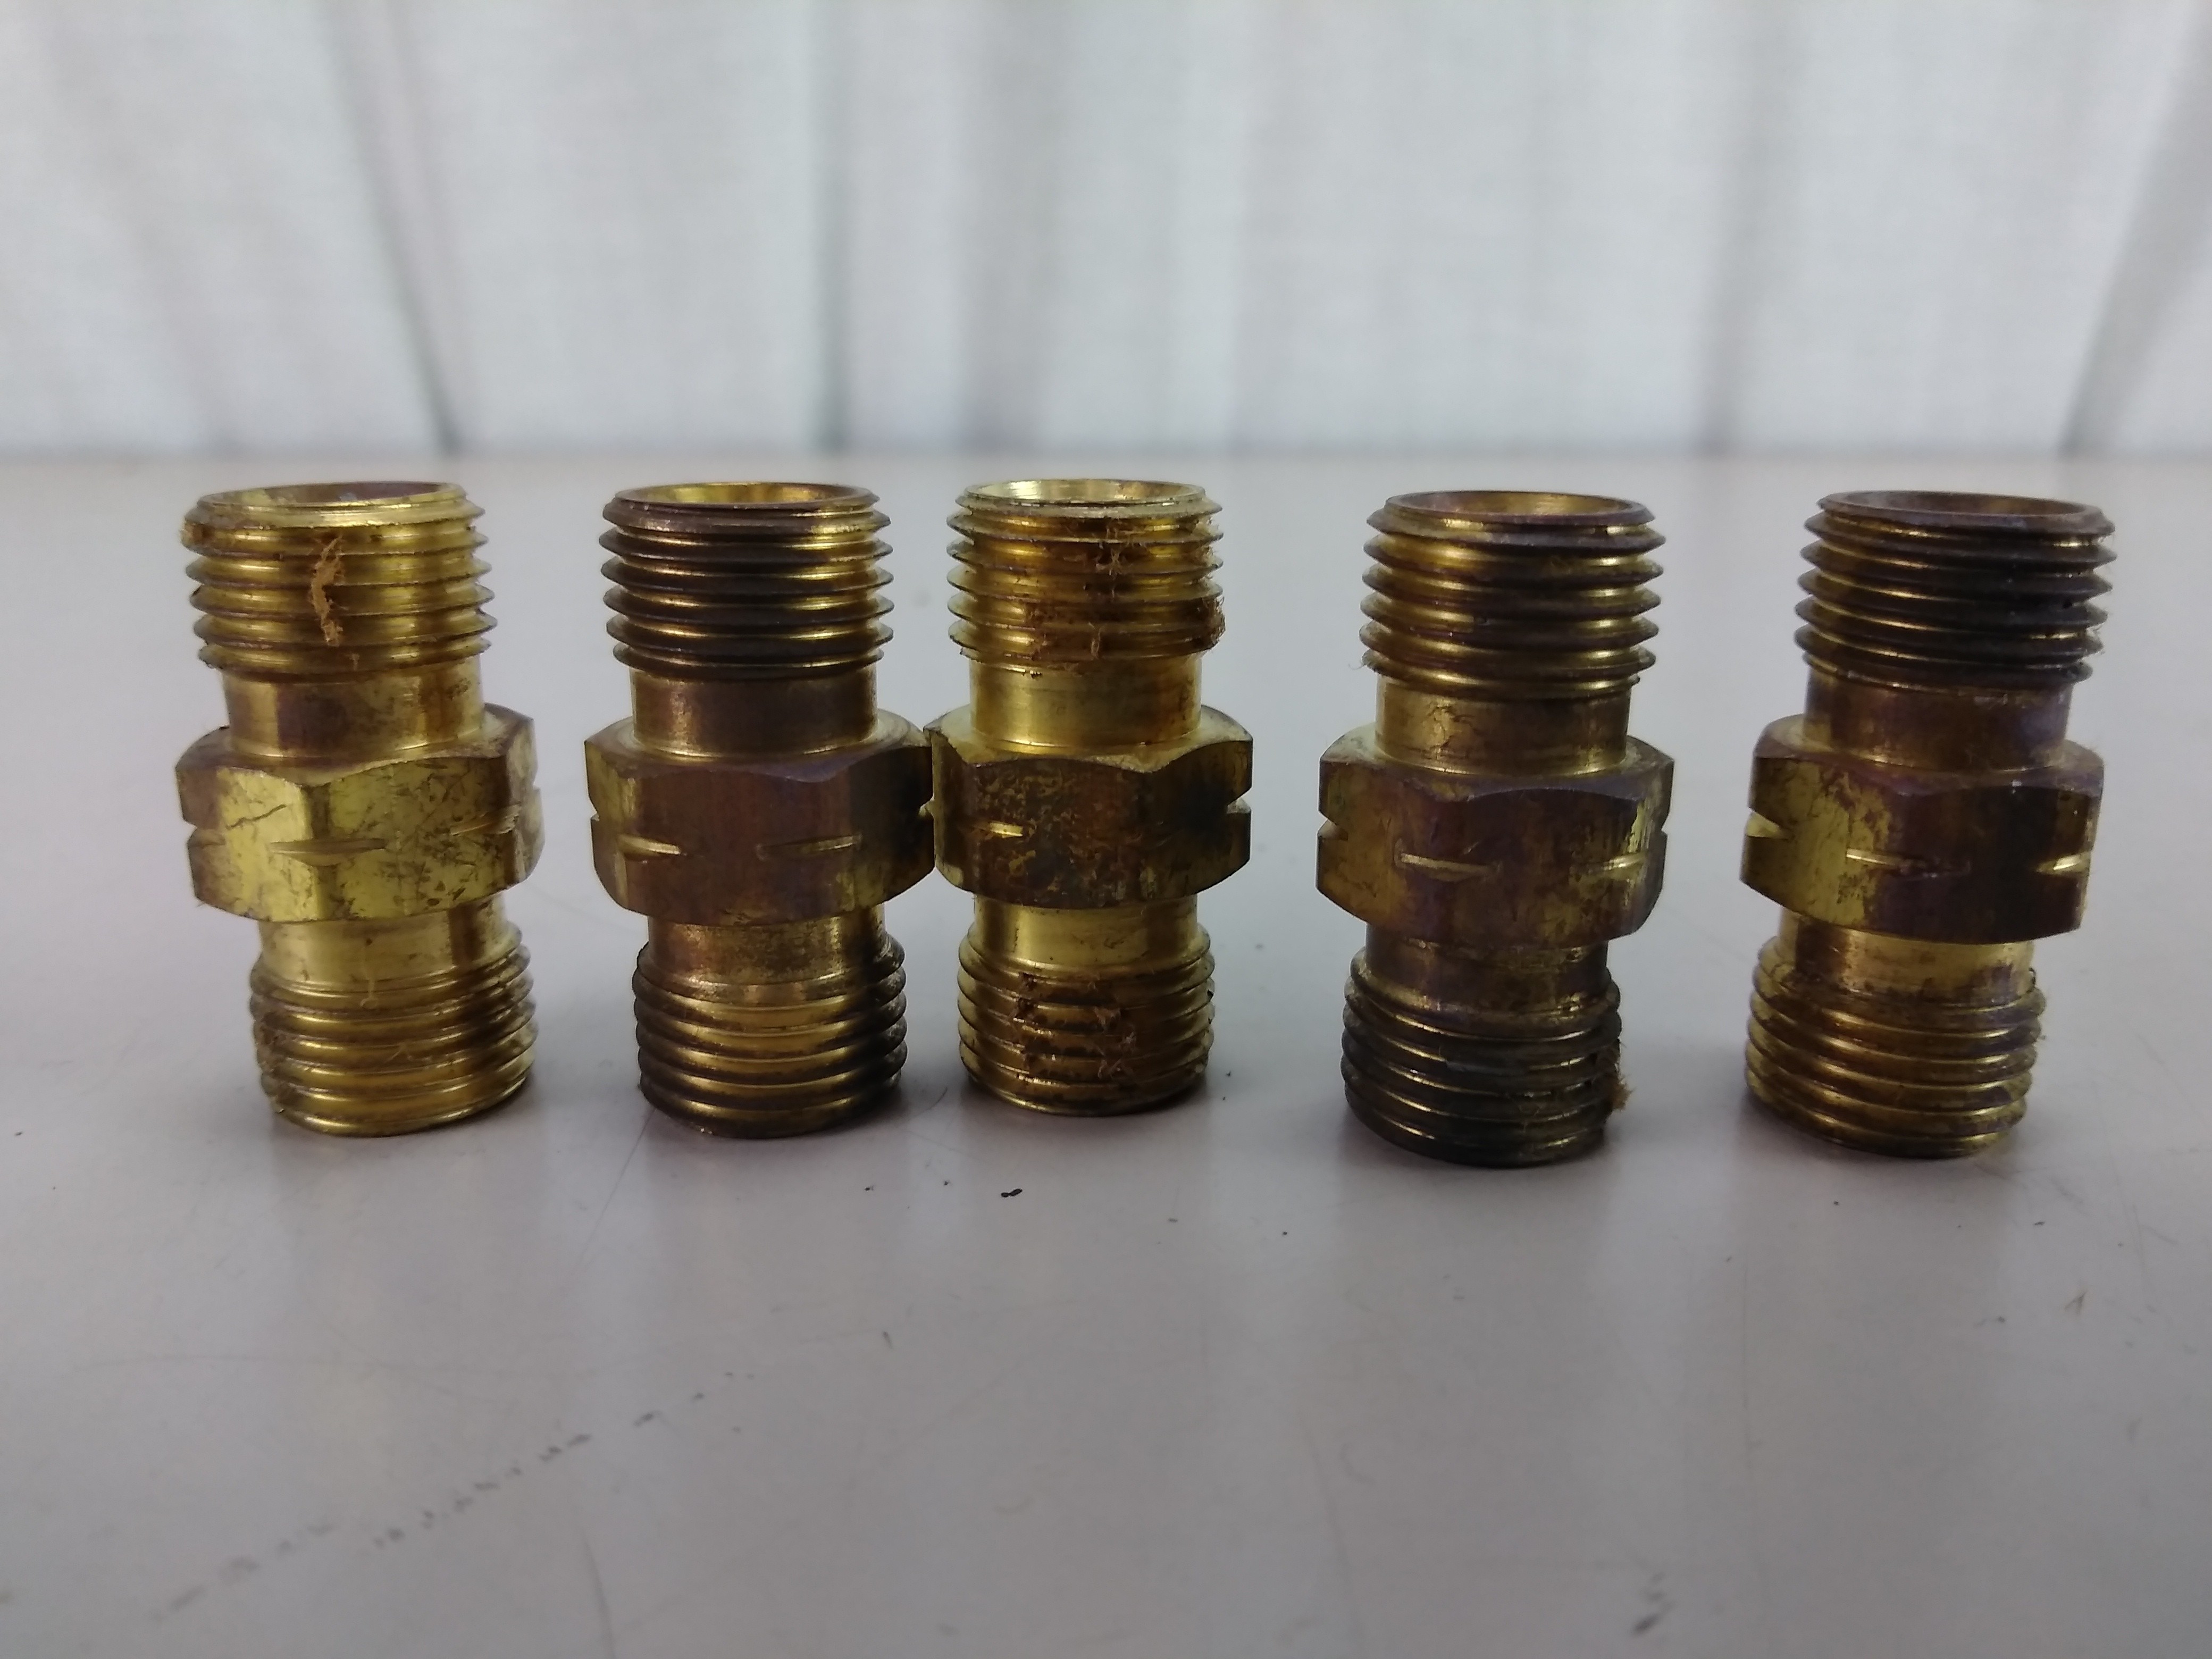 Lot of 5 Western #31 Gas Hose Couplers